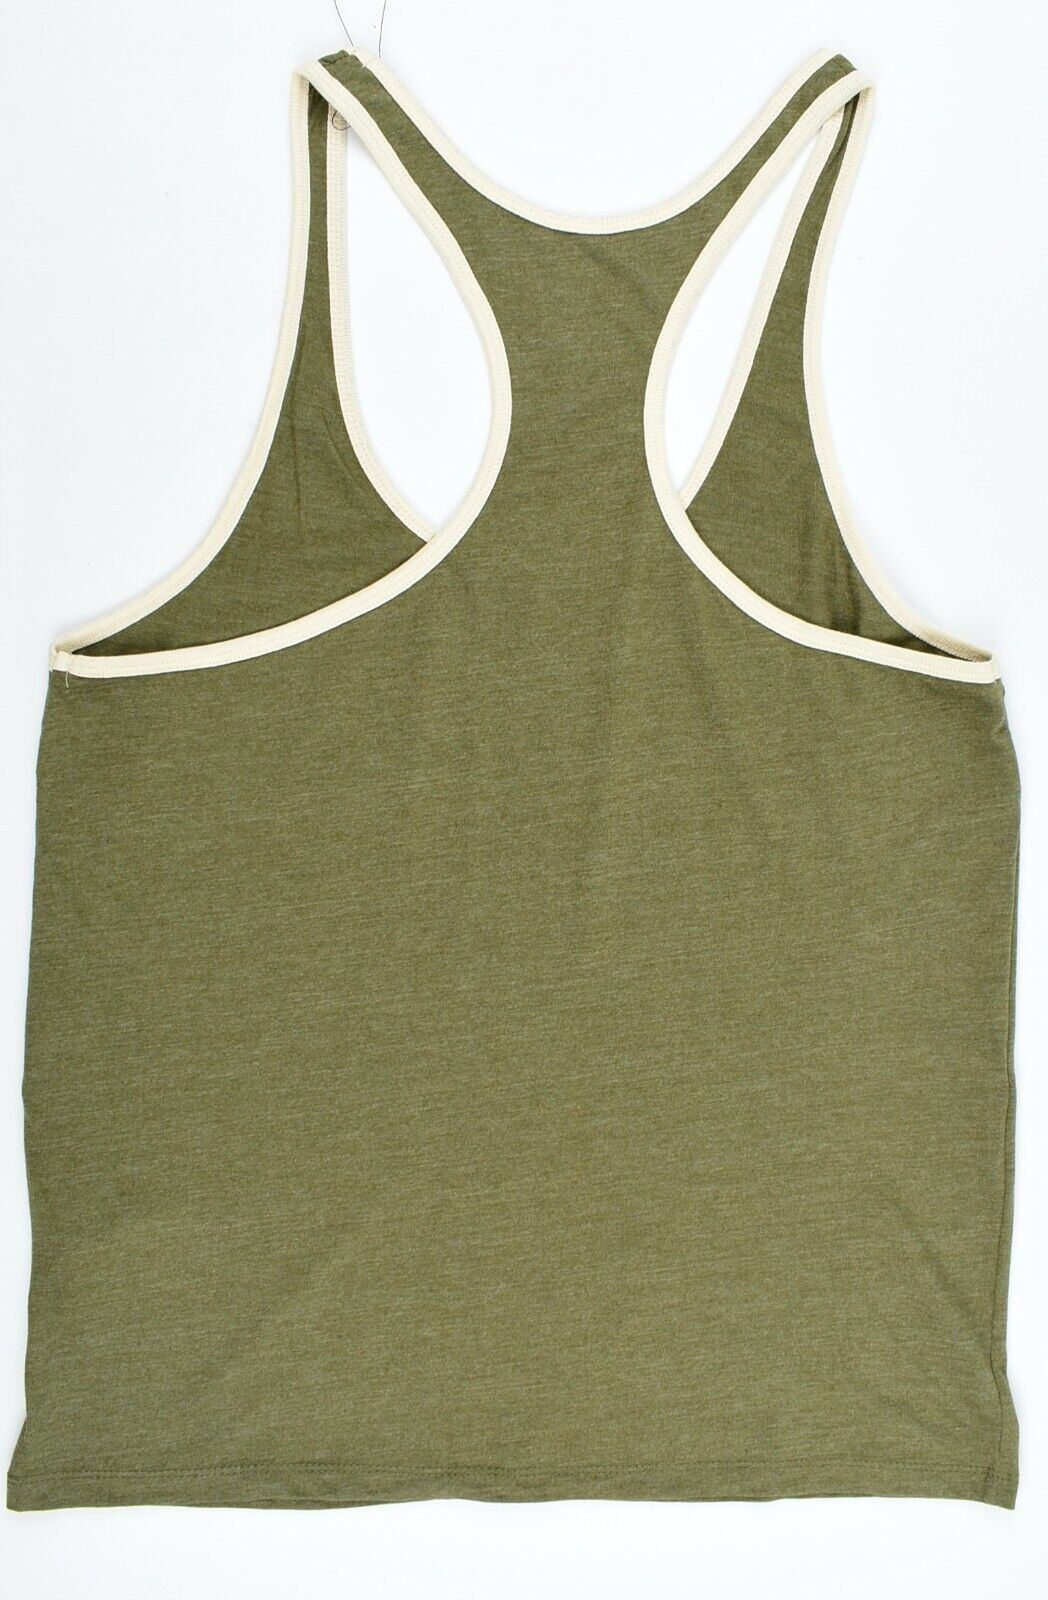 GOLD'S GYM Core Collection Men's MUSCLE JOE Vest Top, Army Green, size L